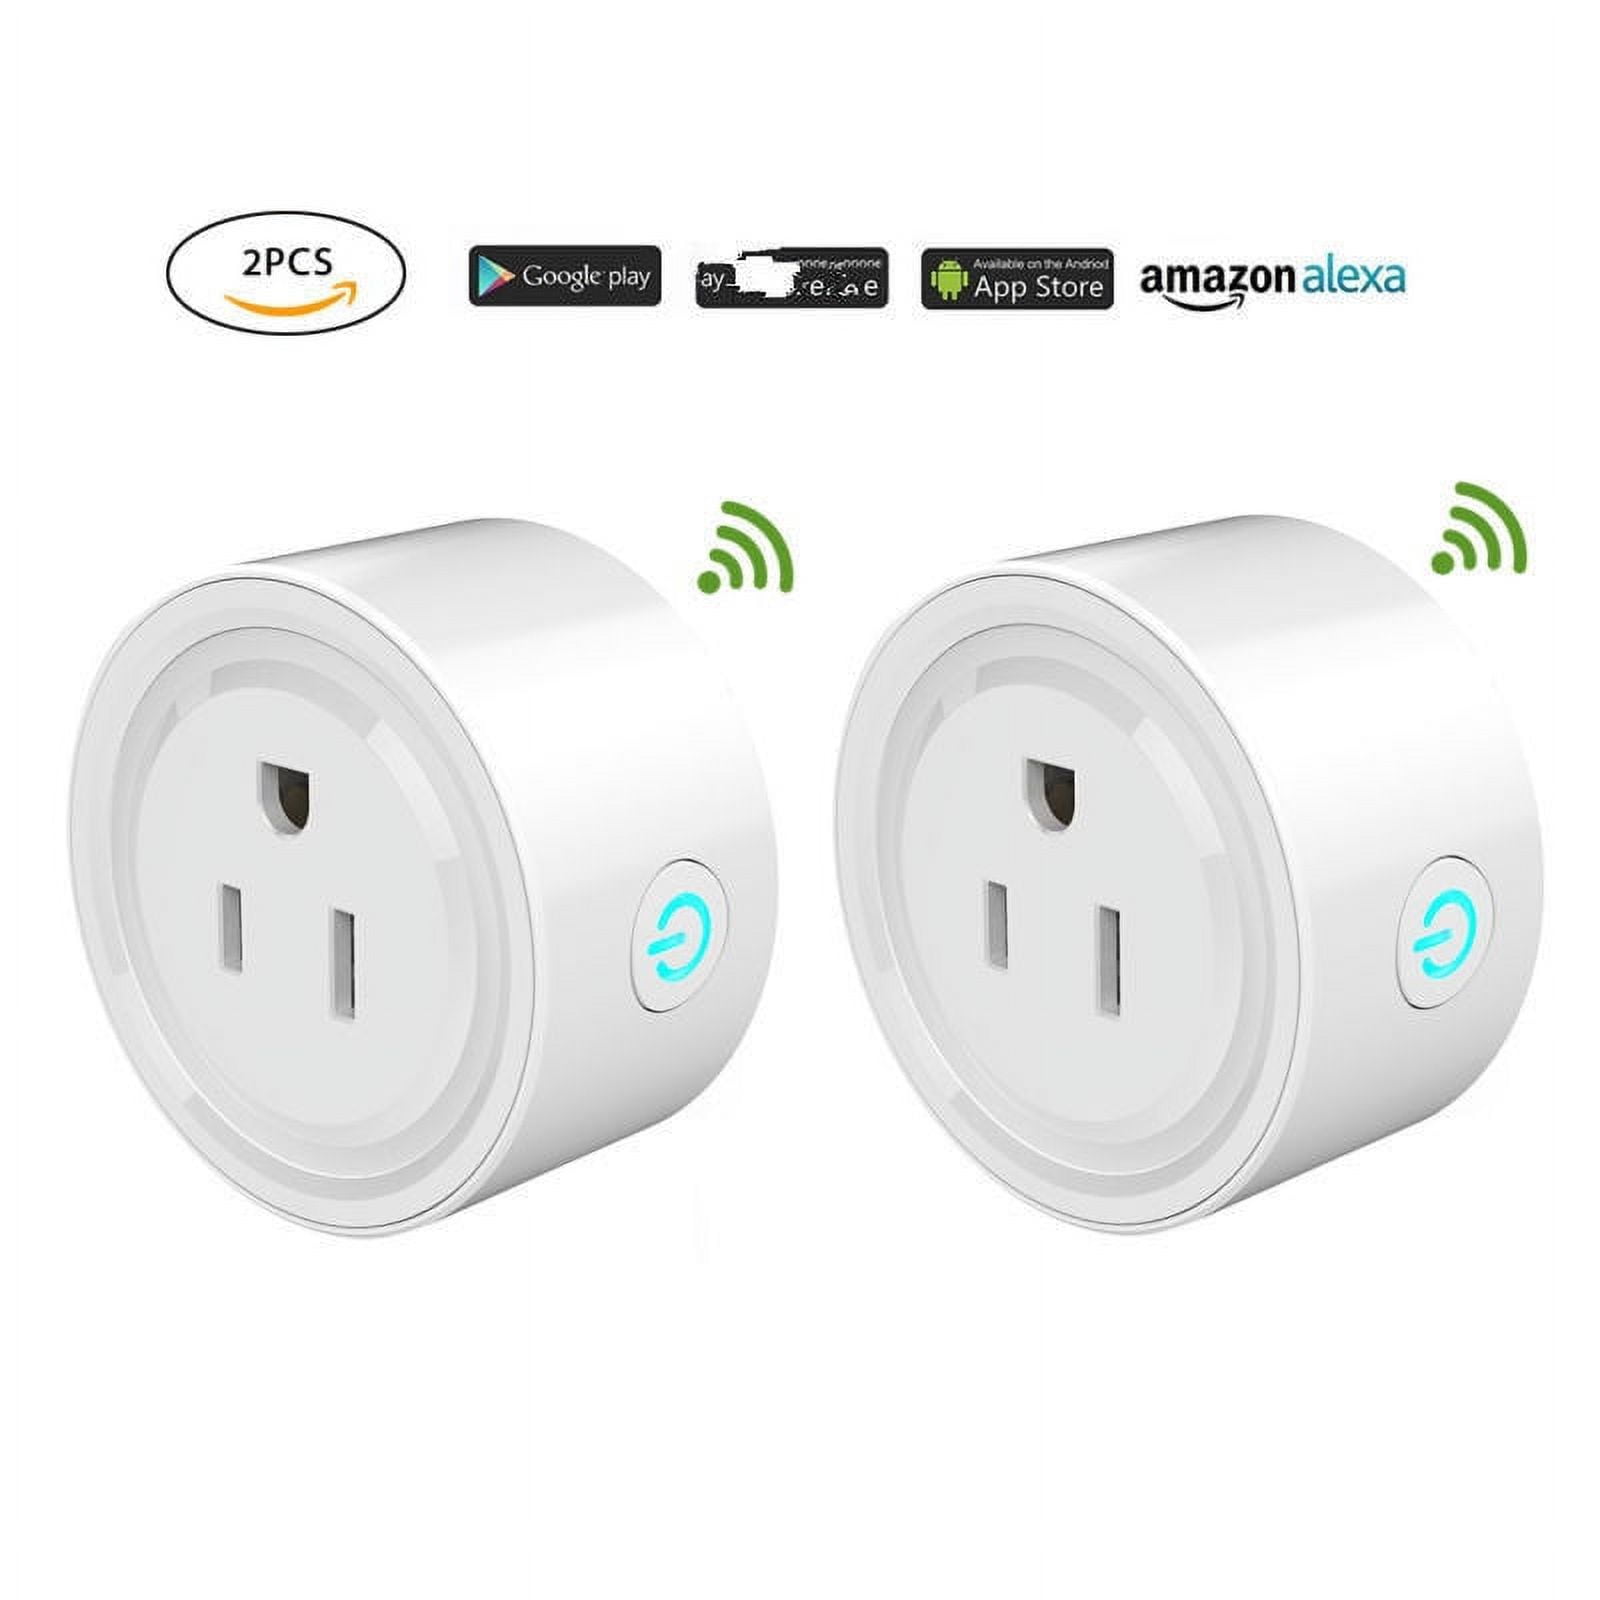 2PCS SONOFF WiFi Smart Plug Energy Consumption Monitoring Outlet Socket  Timer